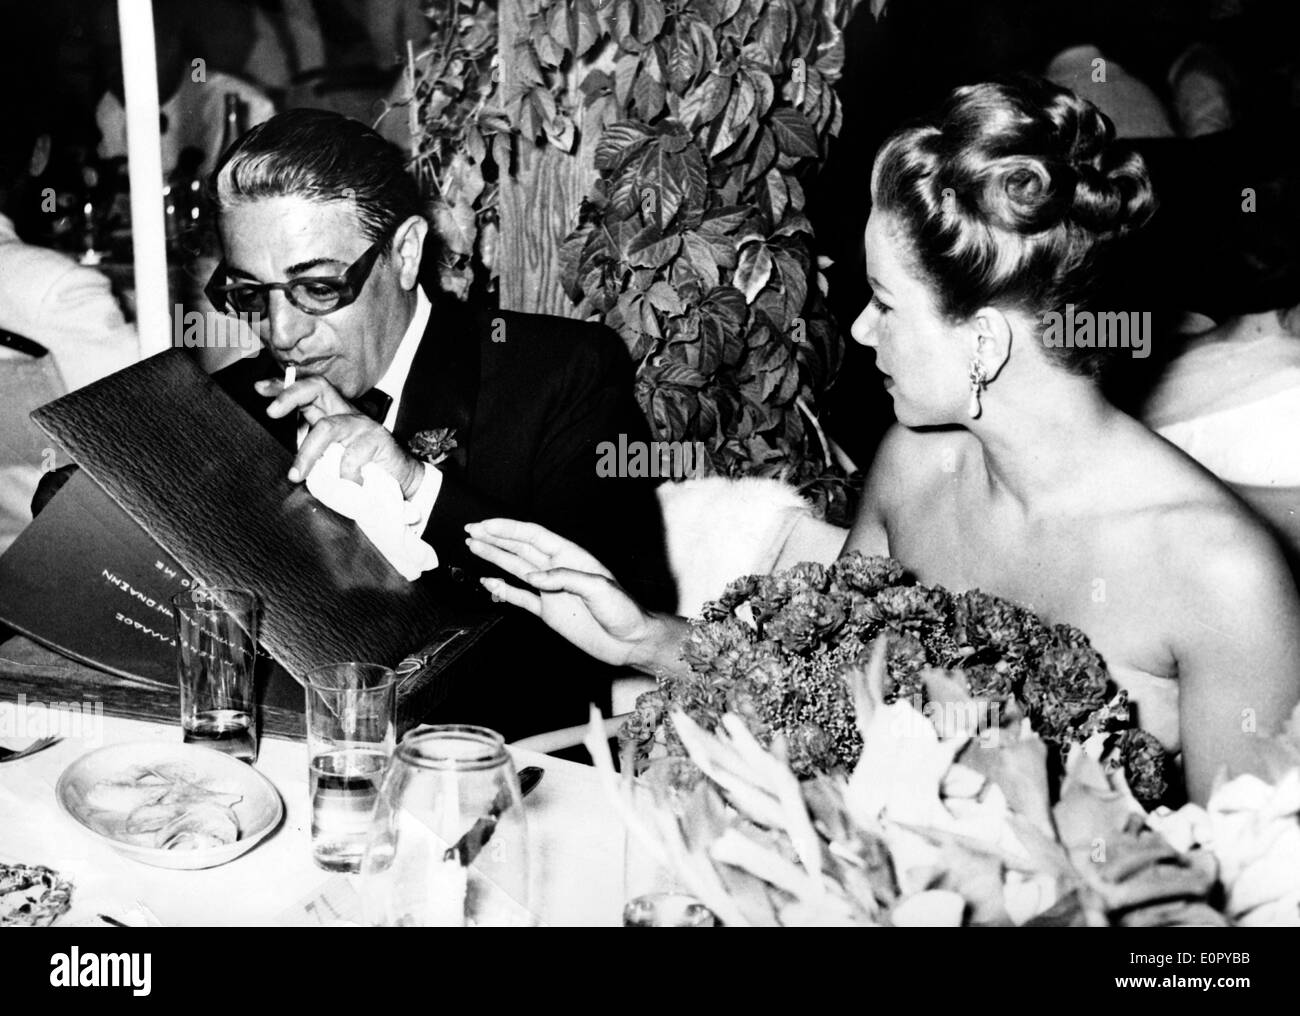 Aristotle Onassis and wife Athina at charity gala Stock Photo